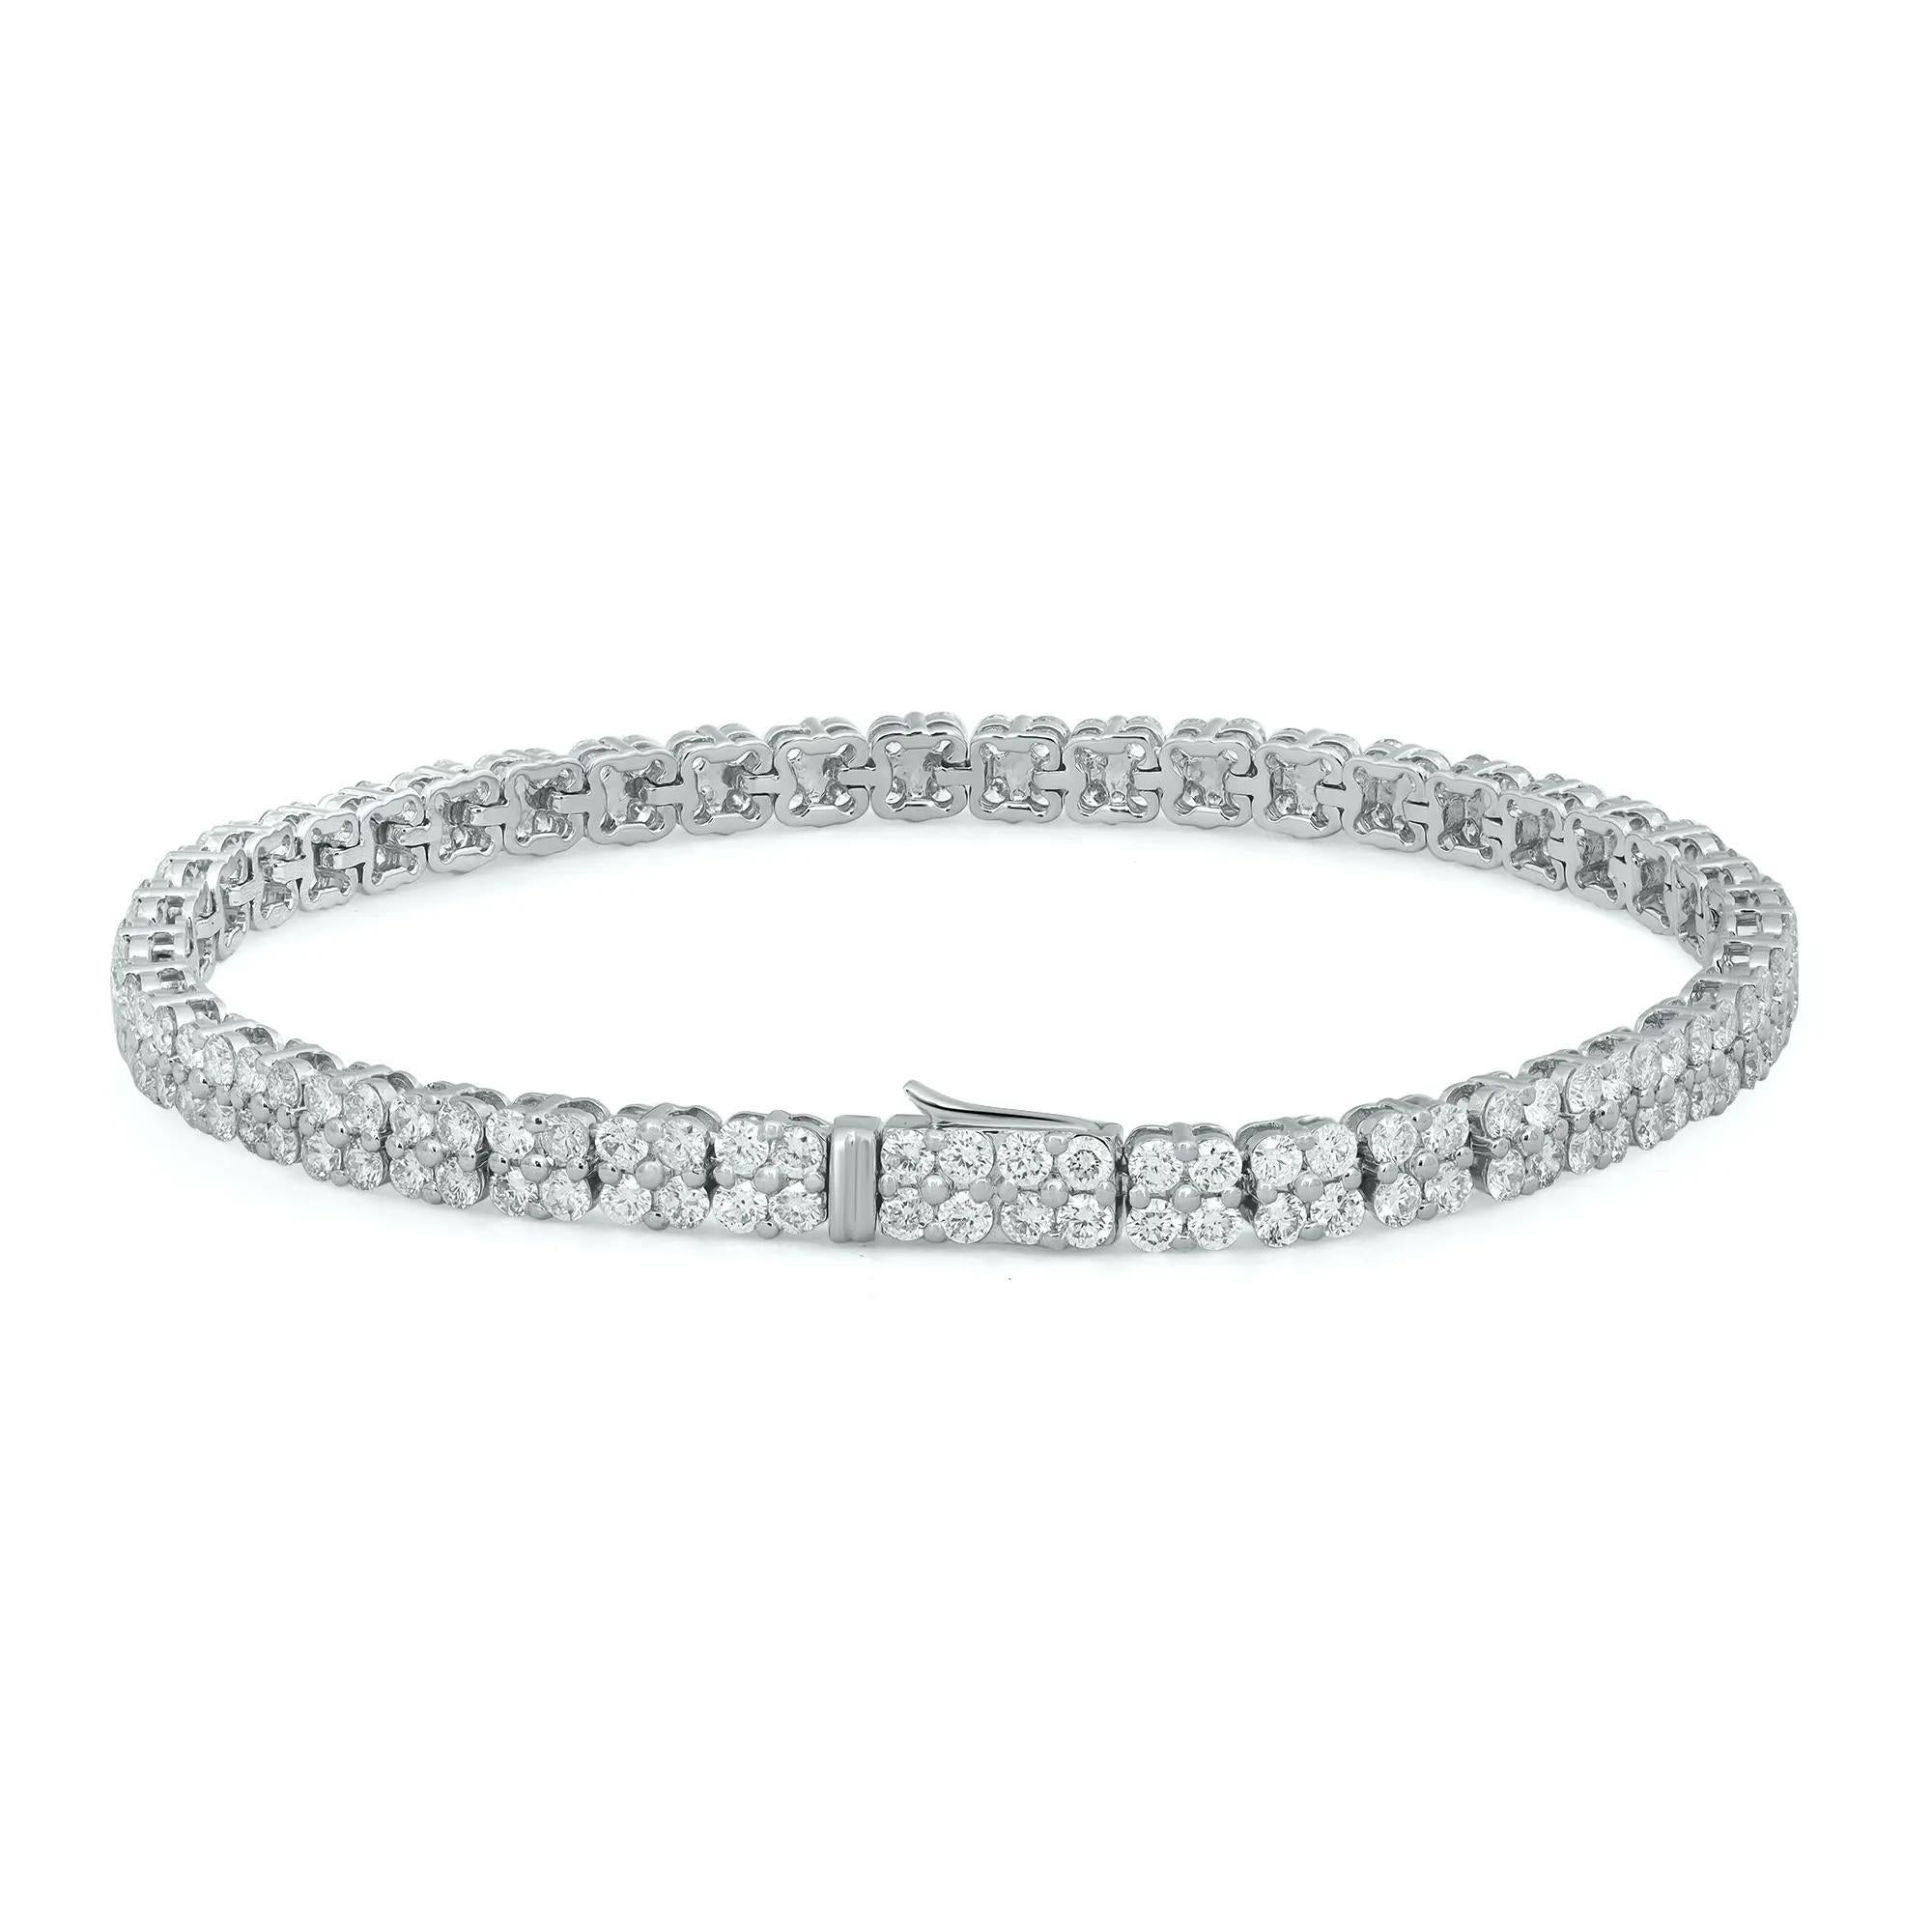 This beautifully crafted Rachael Koen timeless beauty tennis bracelet features prong set round brilliant cut diamonds set in 18k white gold. This truly gorgeous handmade modern creation is a great addition to your jewelry collection. Set with 176